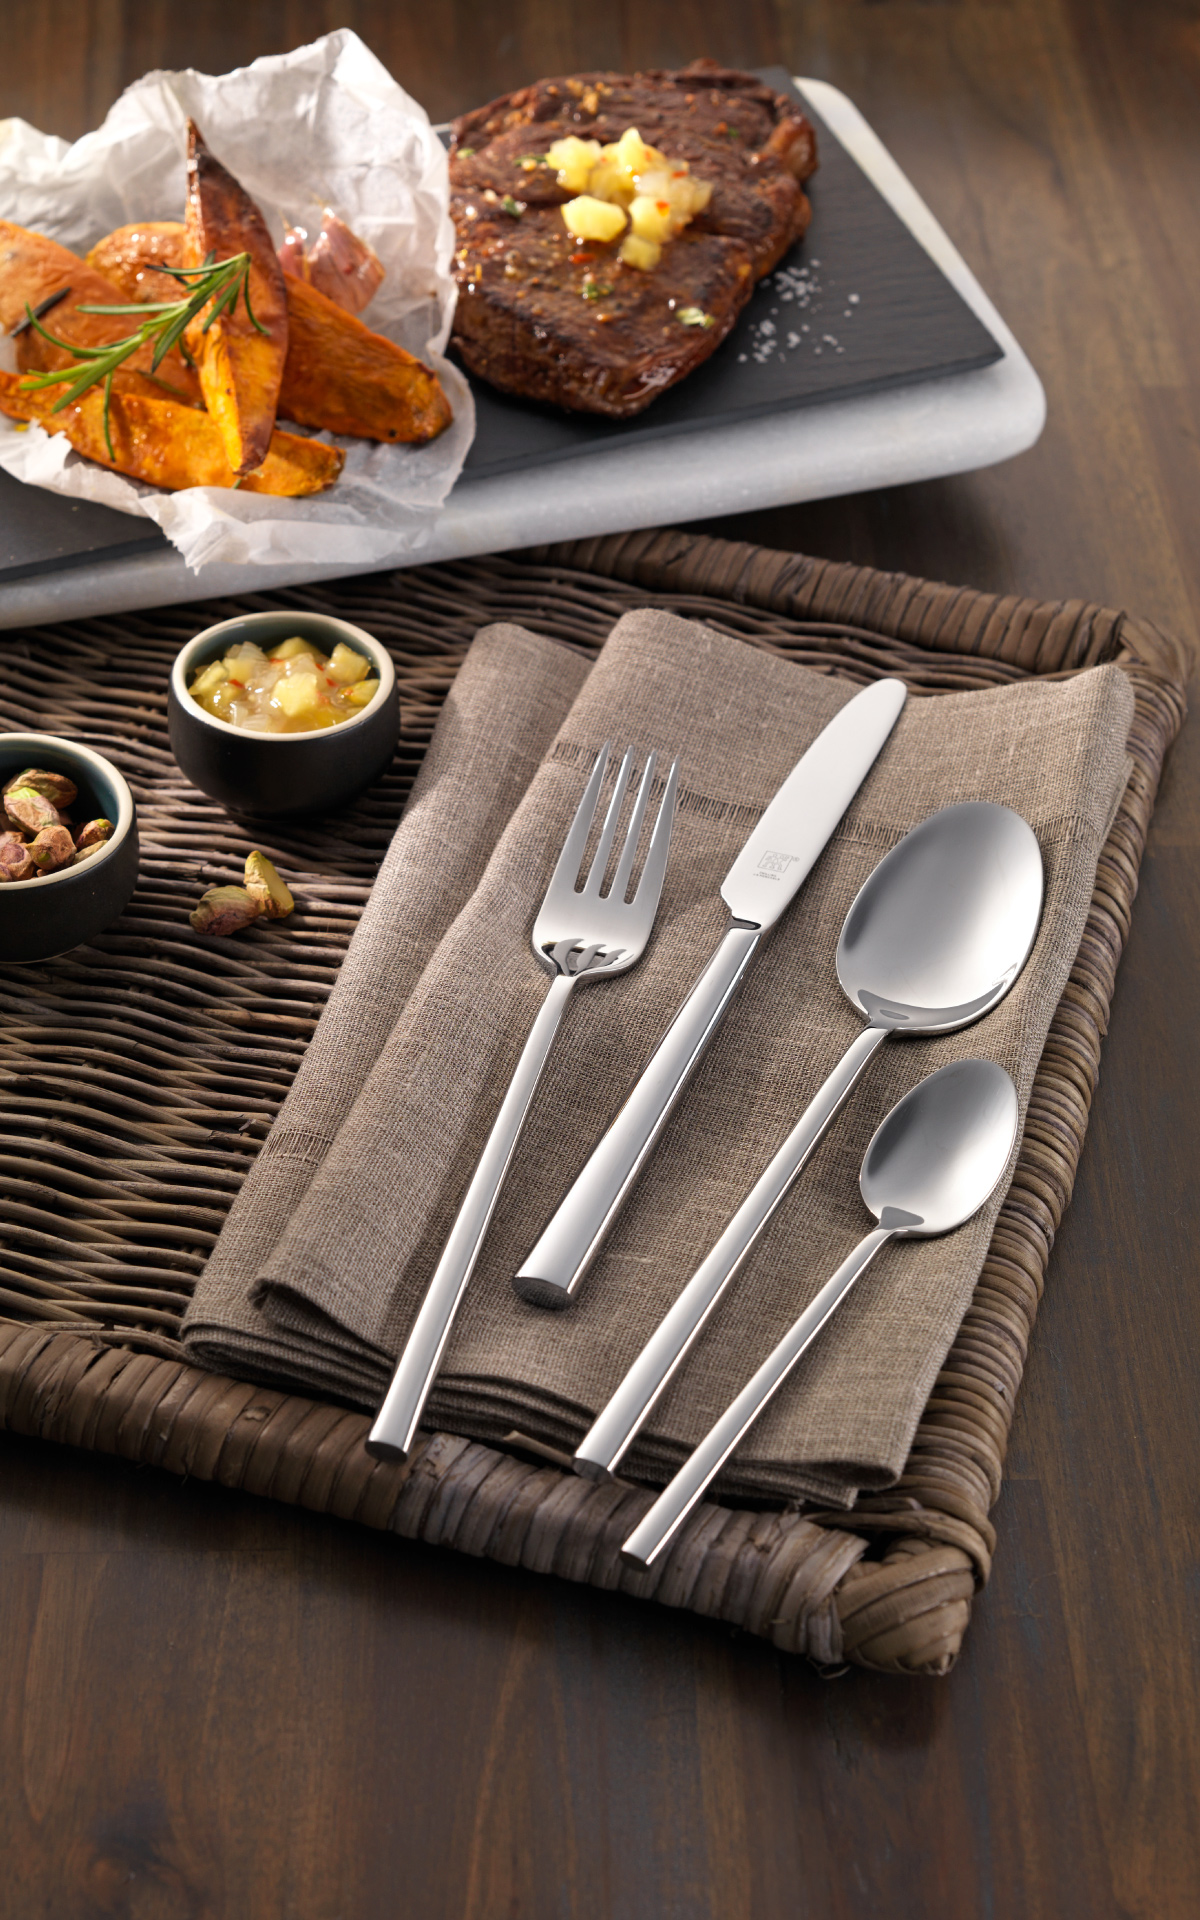 Sweet potato and Zwilling cutlery